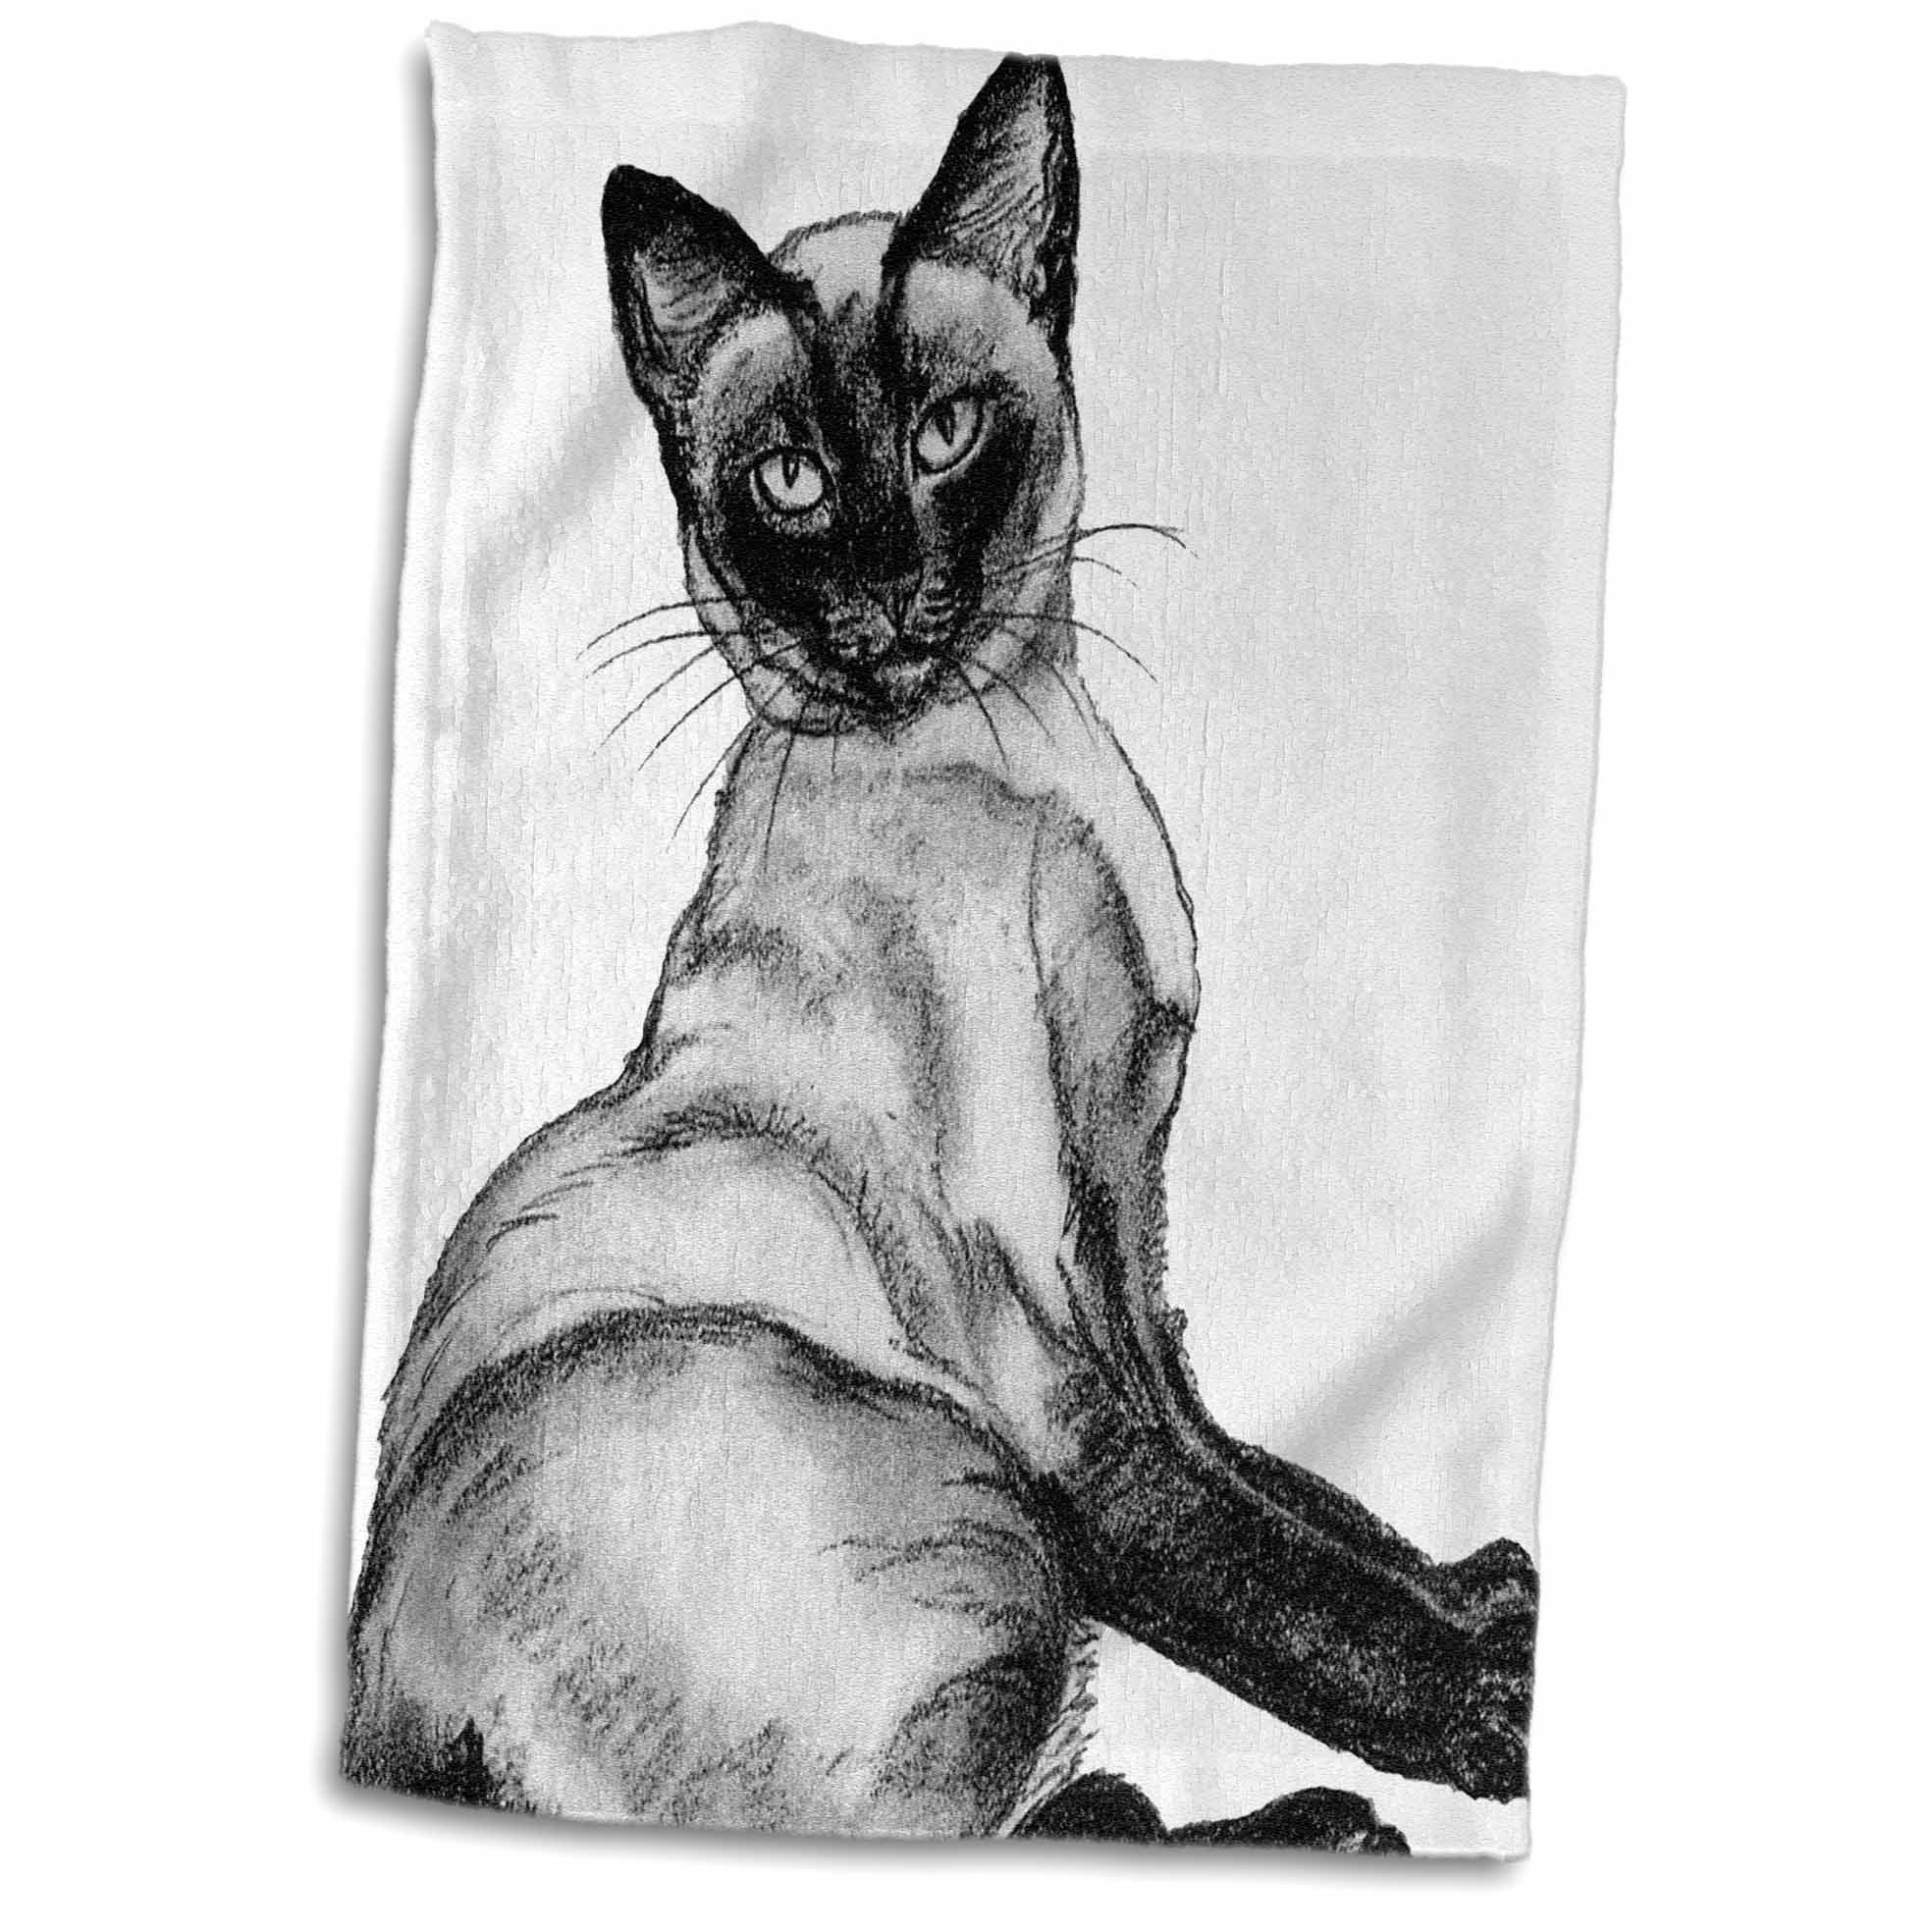 3D Rose Vintage Siamese Cat Pets and Animals Hand/Sports Towel, 15 x 22